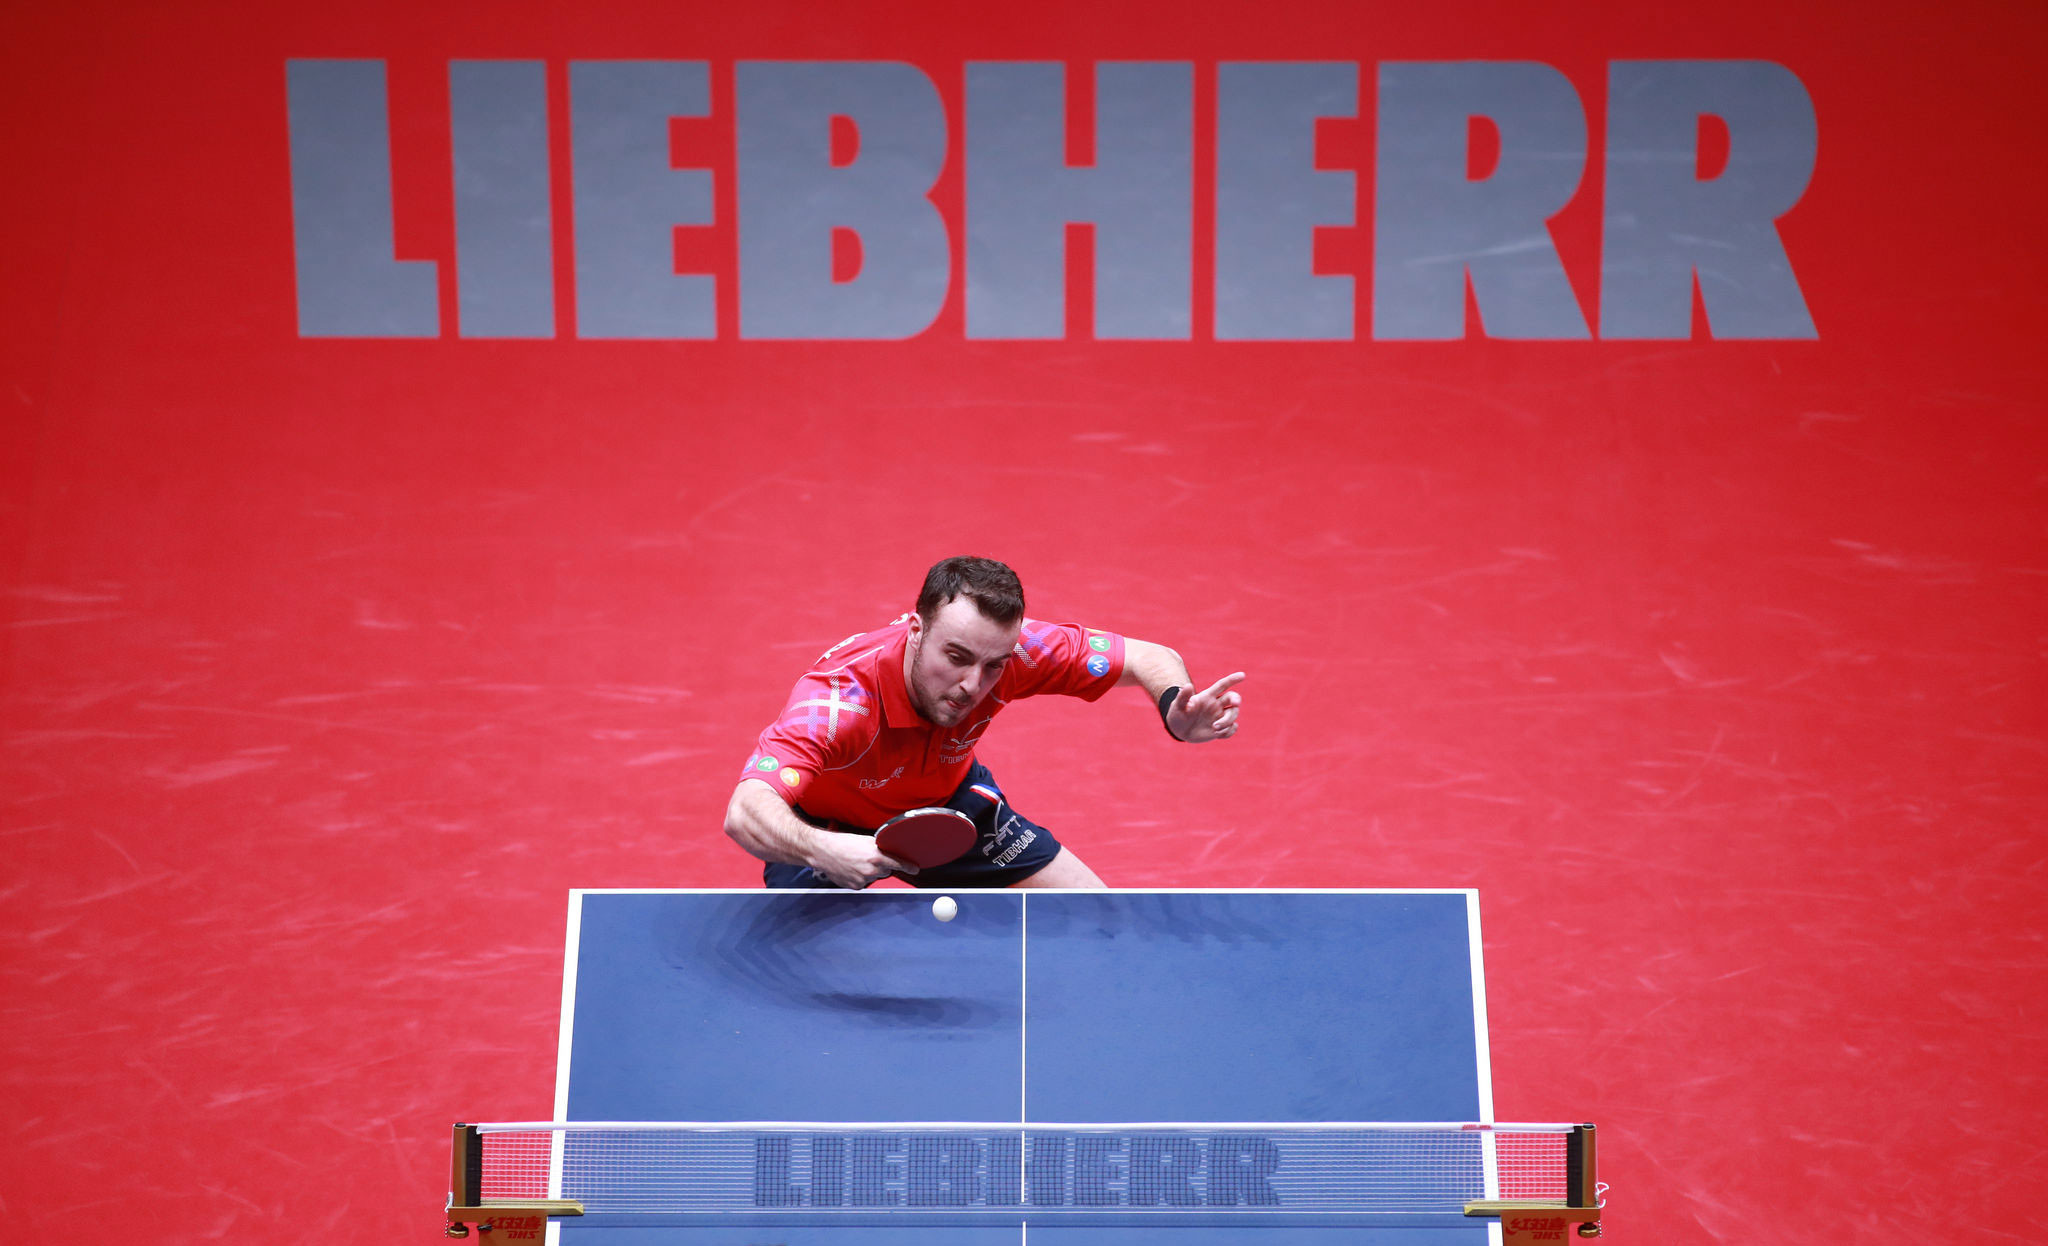 Liebherr to sponsor 2019 and 2020 ITTF World and European Championships